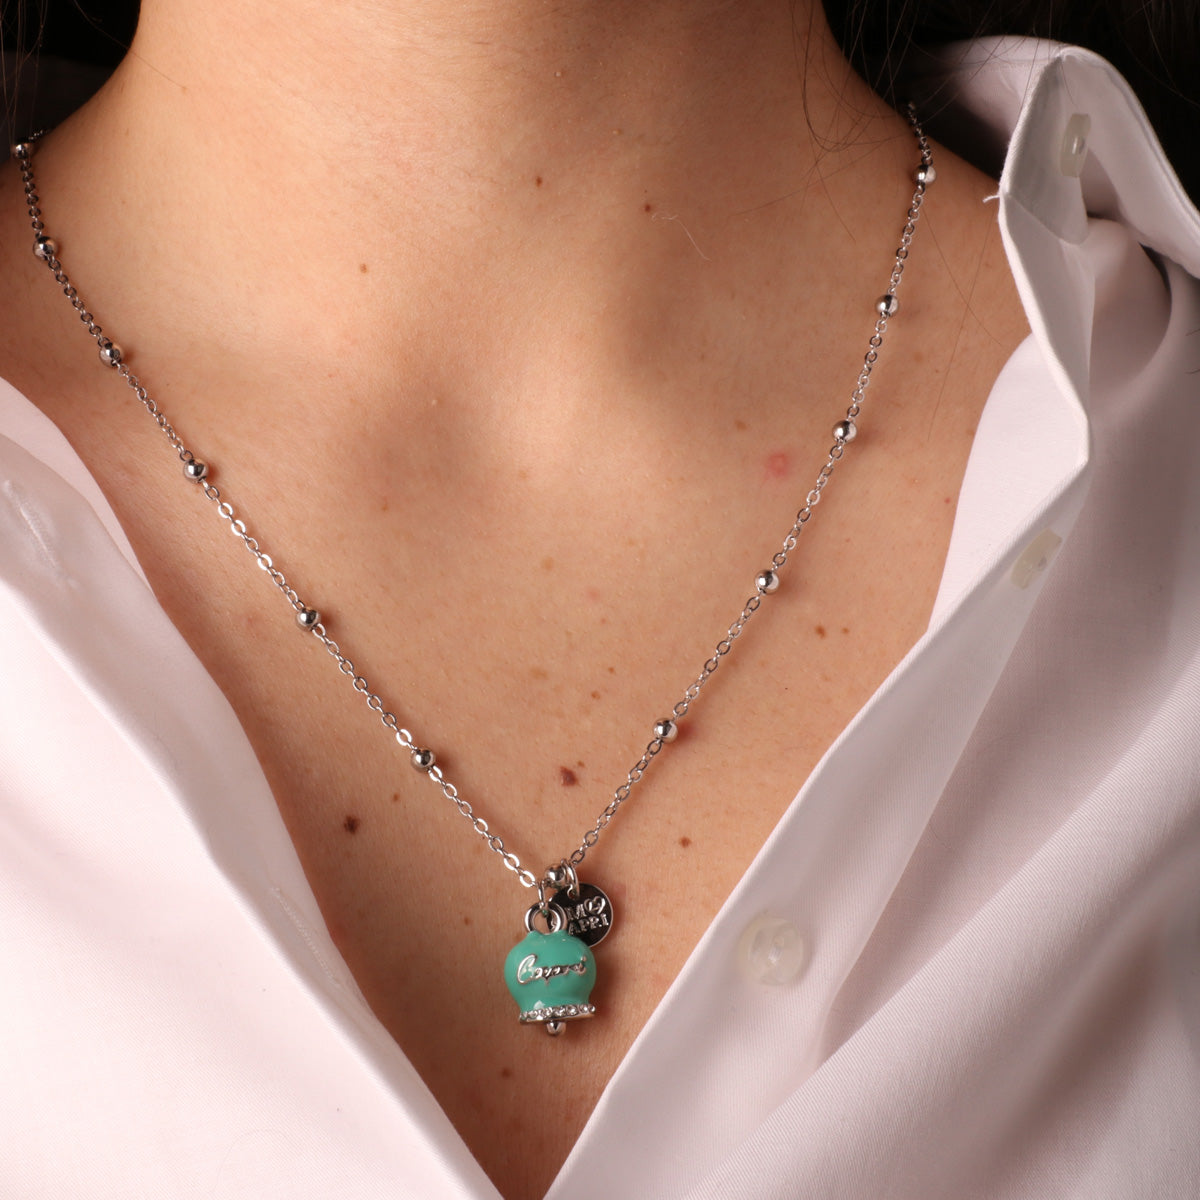 Metal necklace with bell of the watercontic green water, with Capri writing